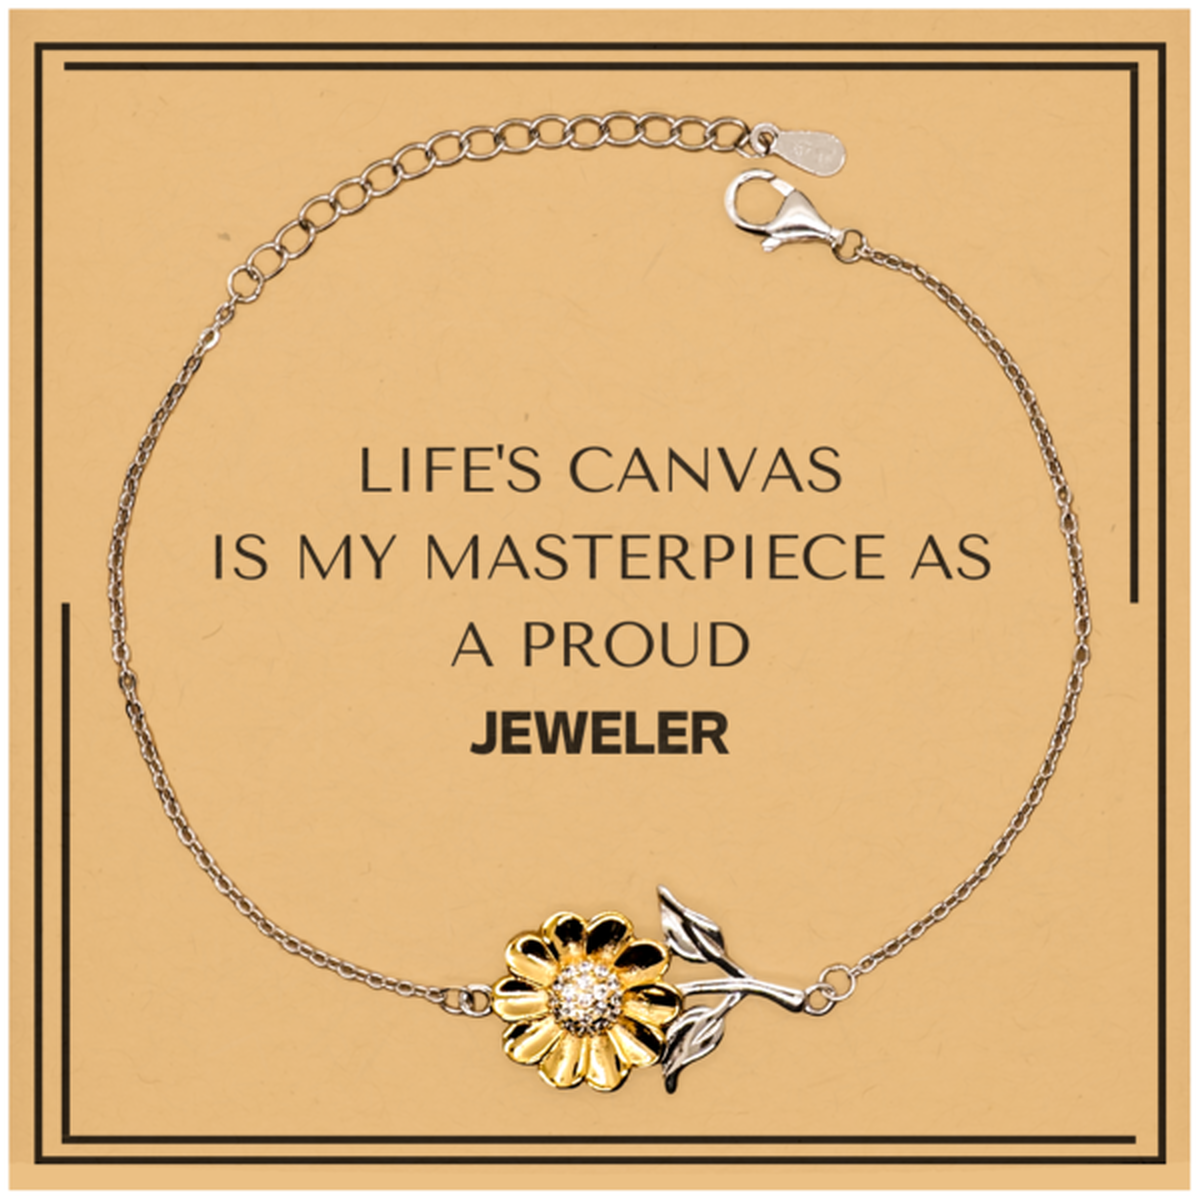 Proud Jeweler Gifts, Life's canvas is my masterpiece, Epic Birthday Christmas Unique Sunflower Bracelet For Jeweler, Coworkers, Men, Women, Friends